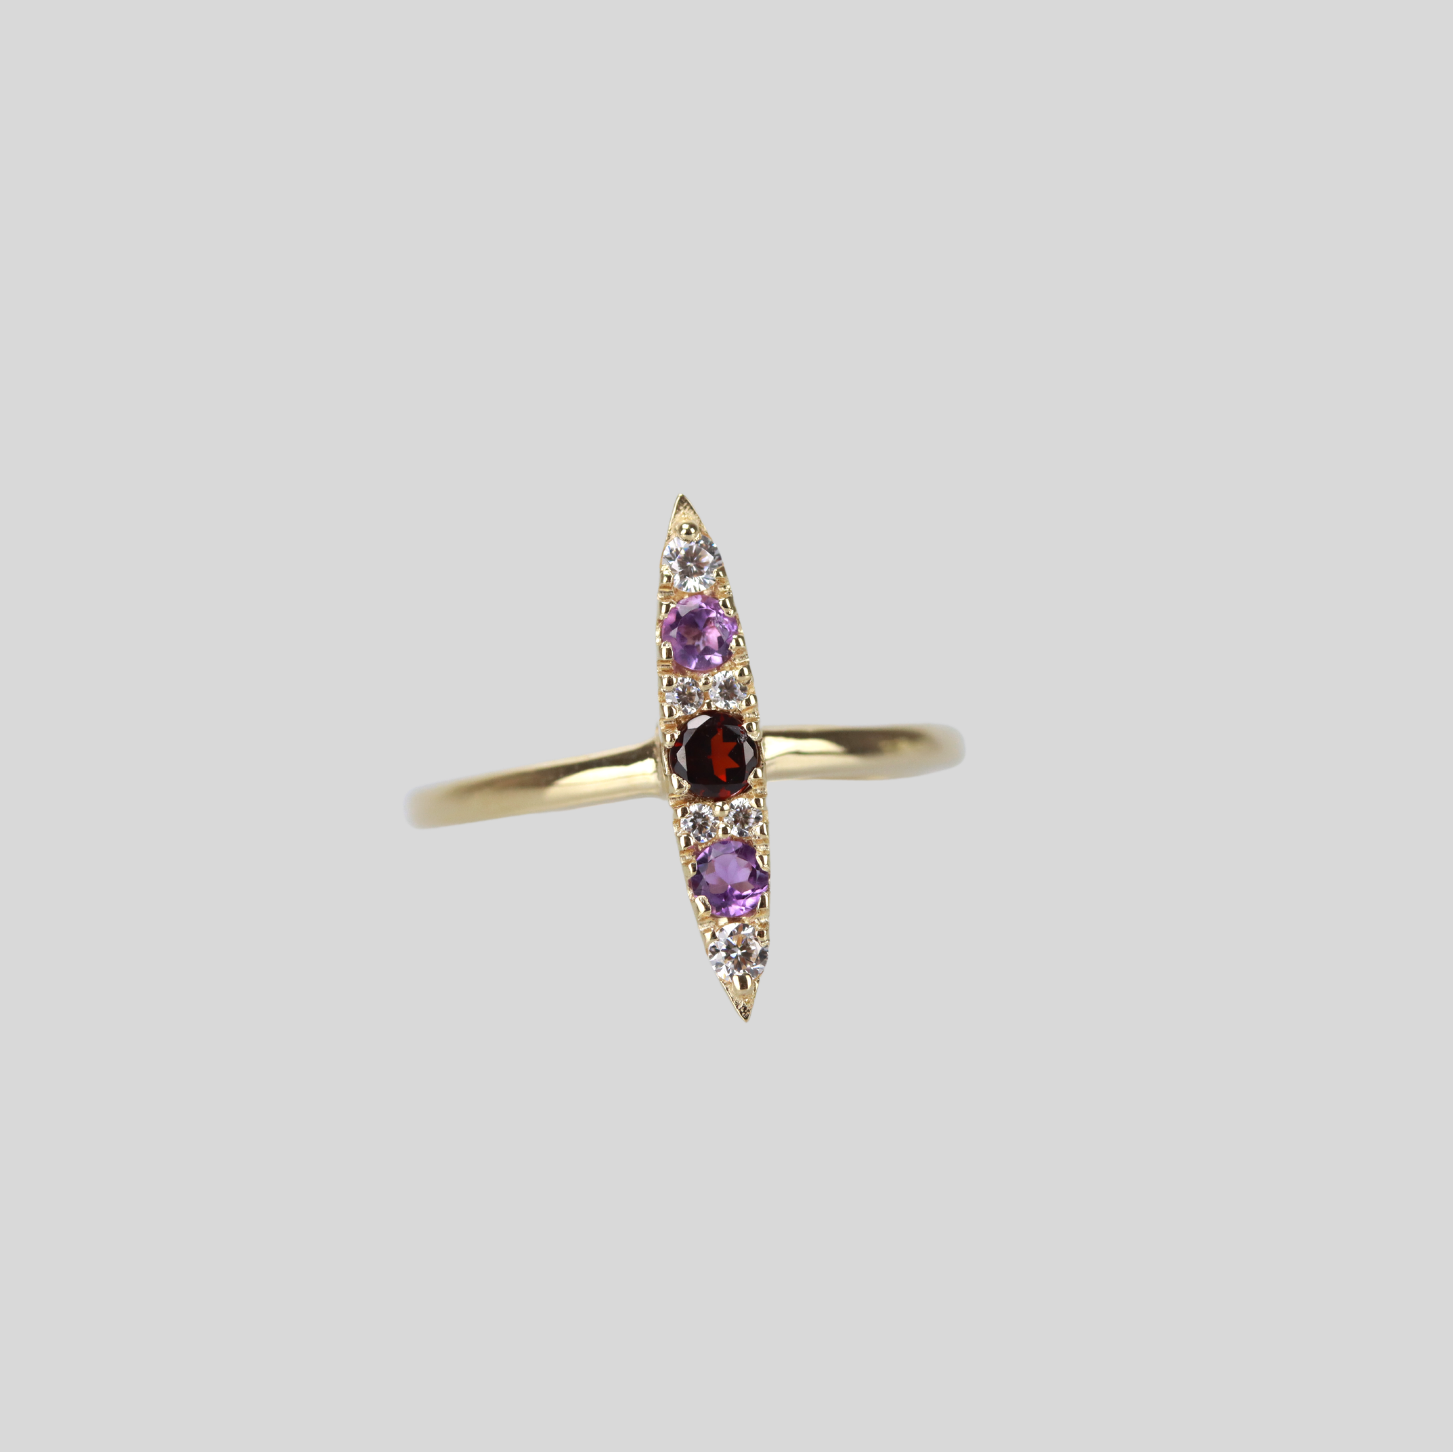 Solid 14k gold sleek navette ring with garnet and amethyst